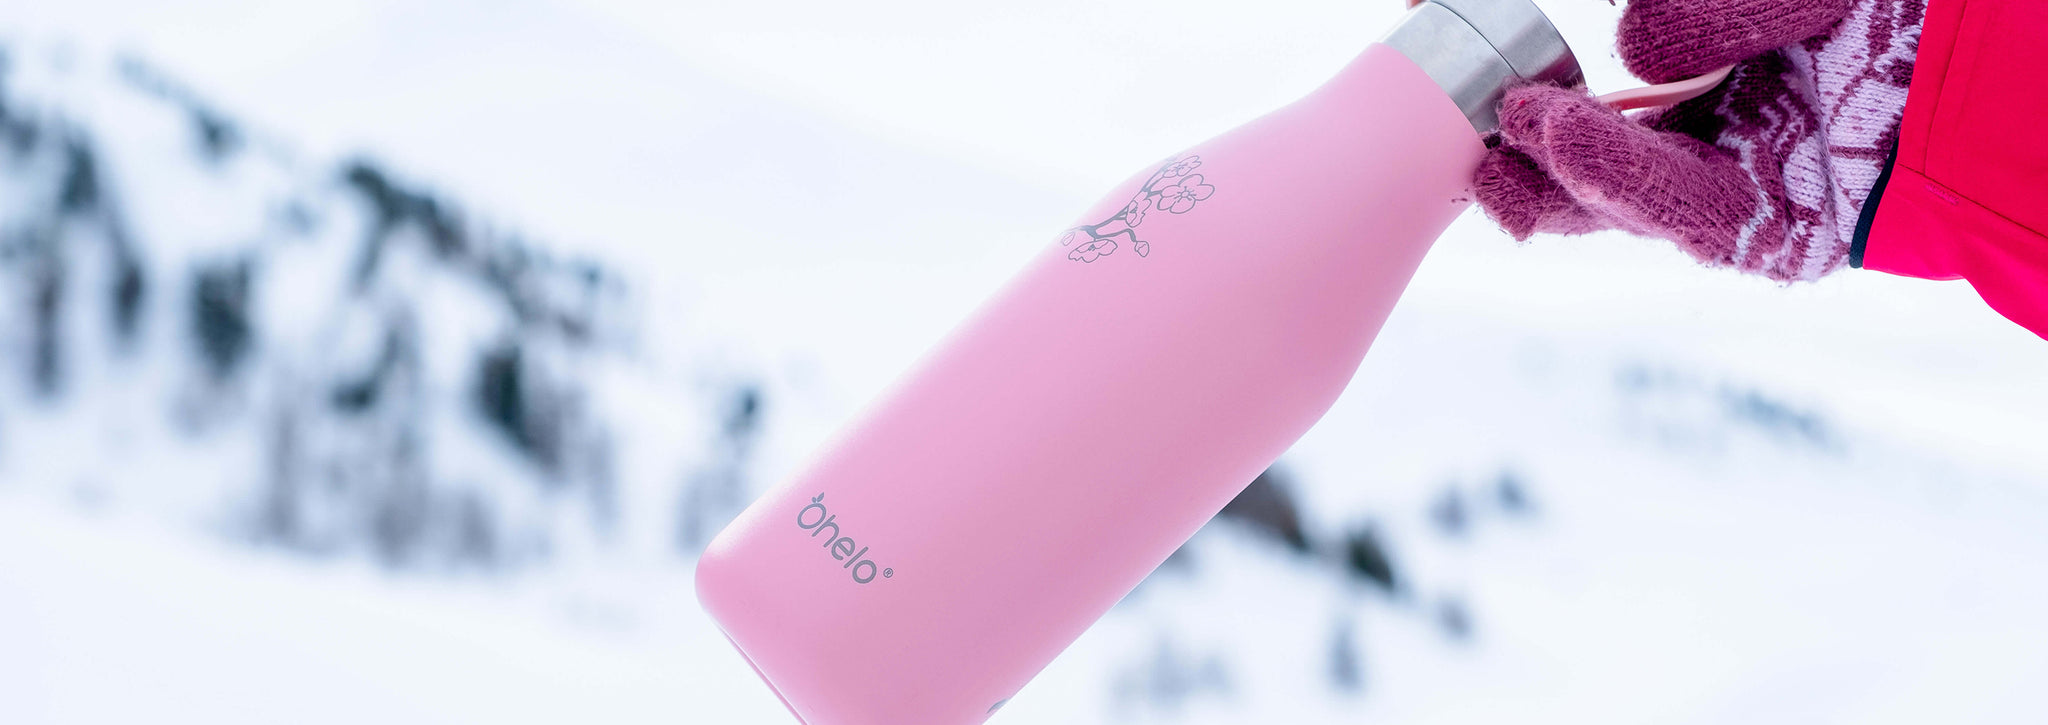 Ohelo pink blossom stainless steel water bottle